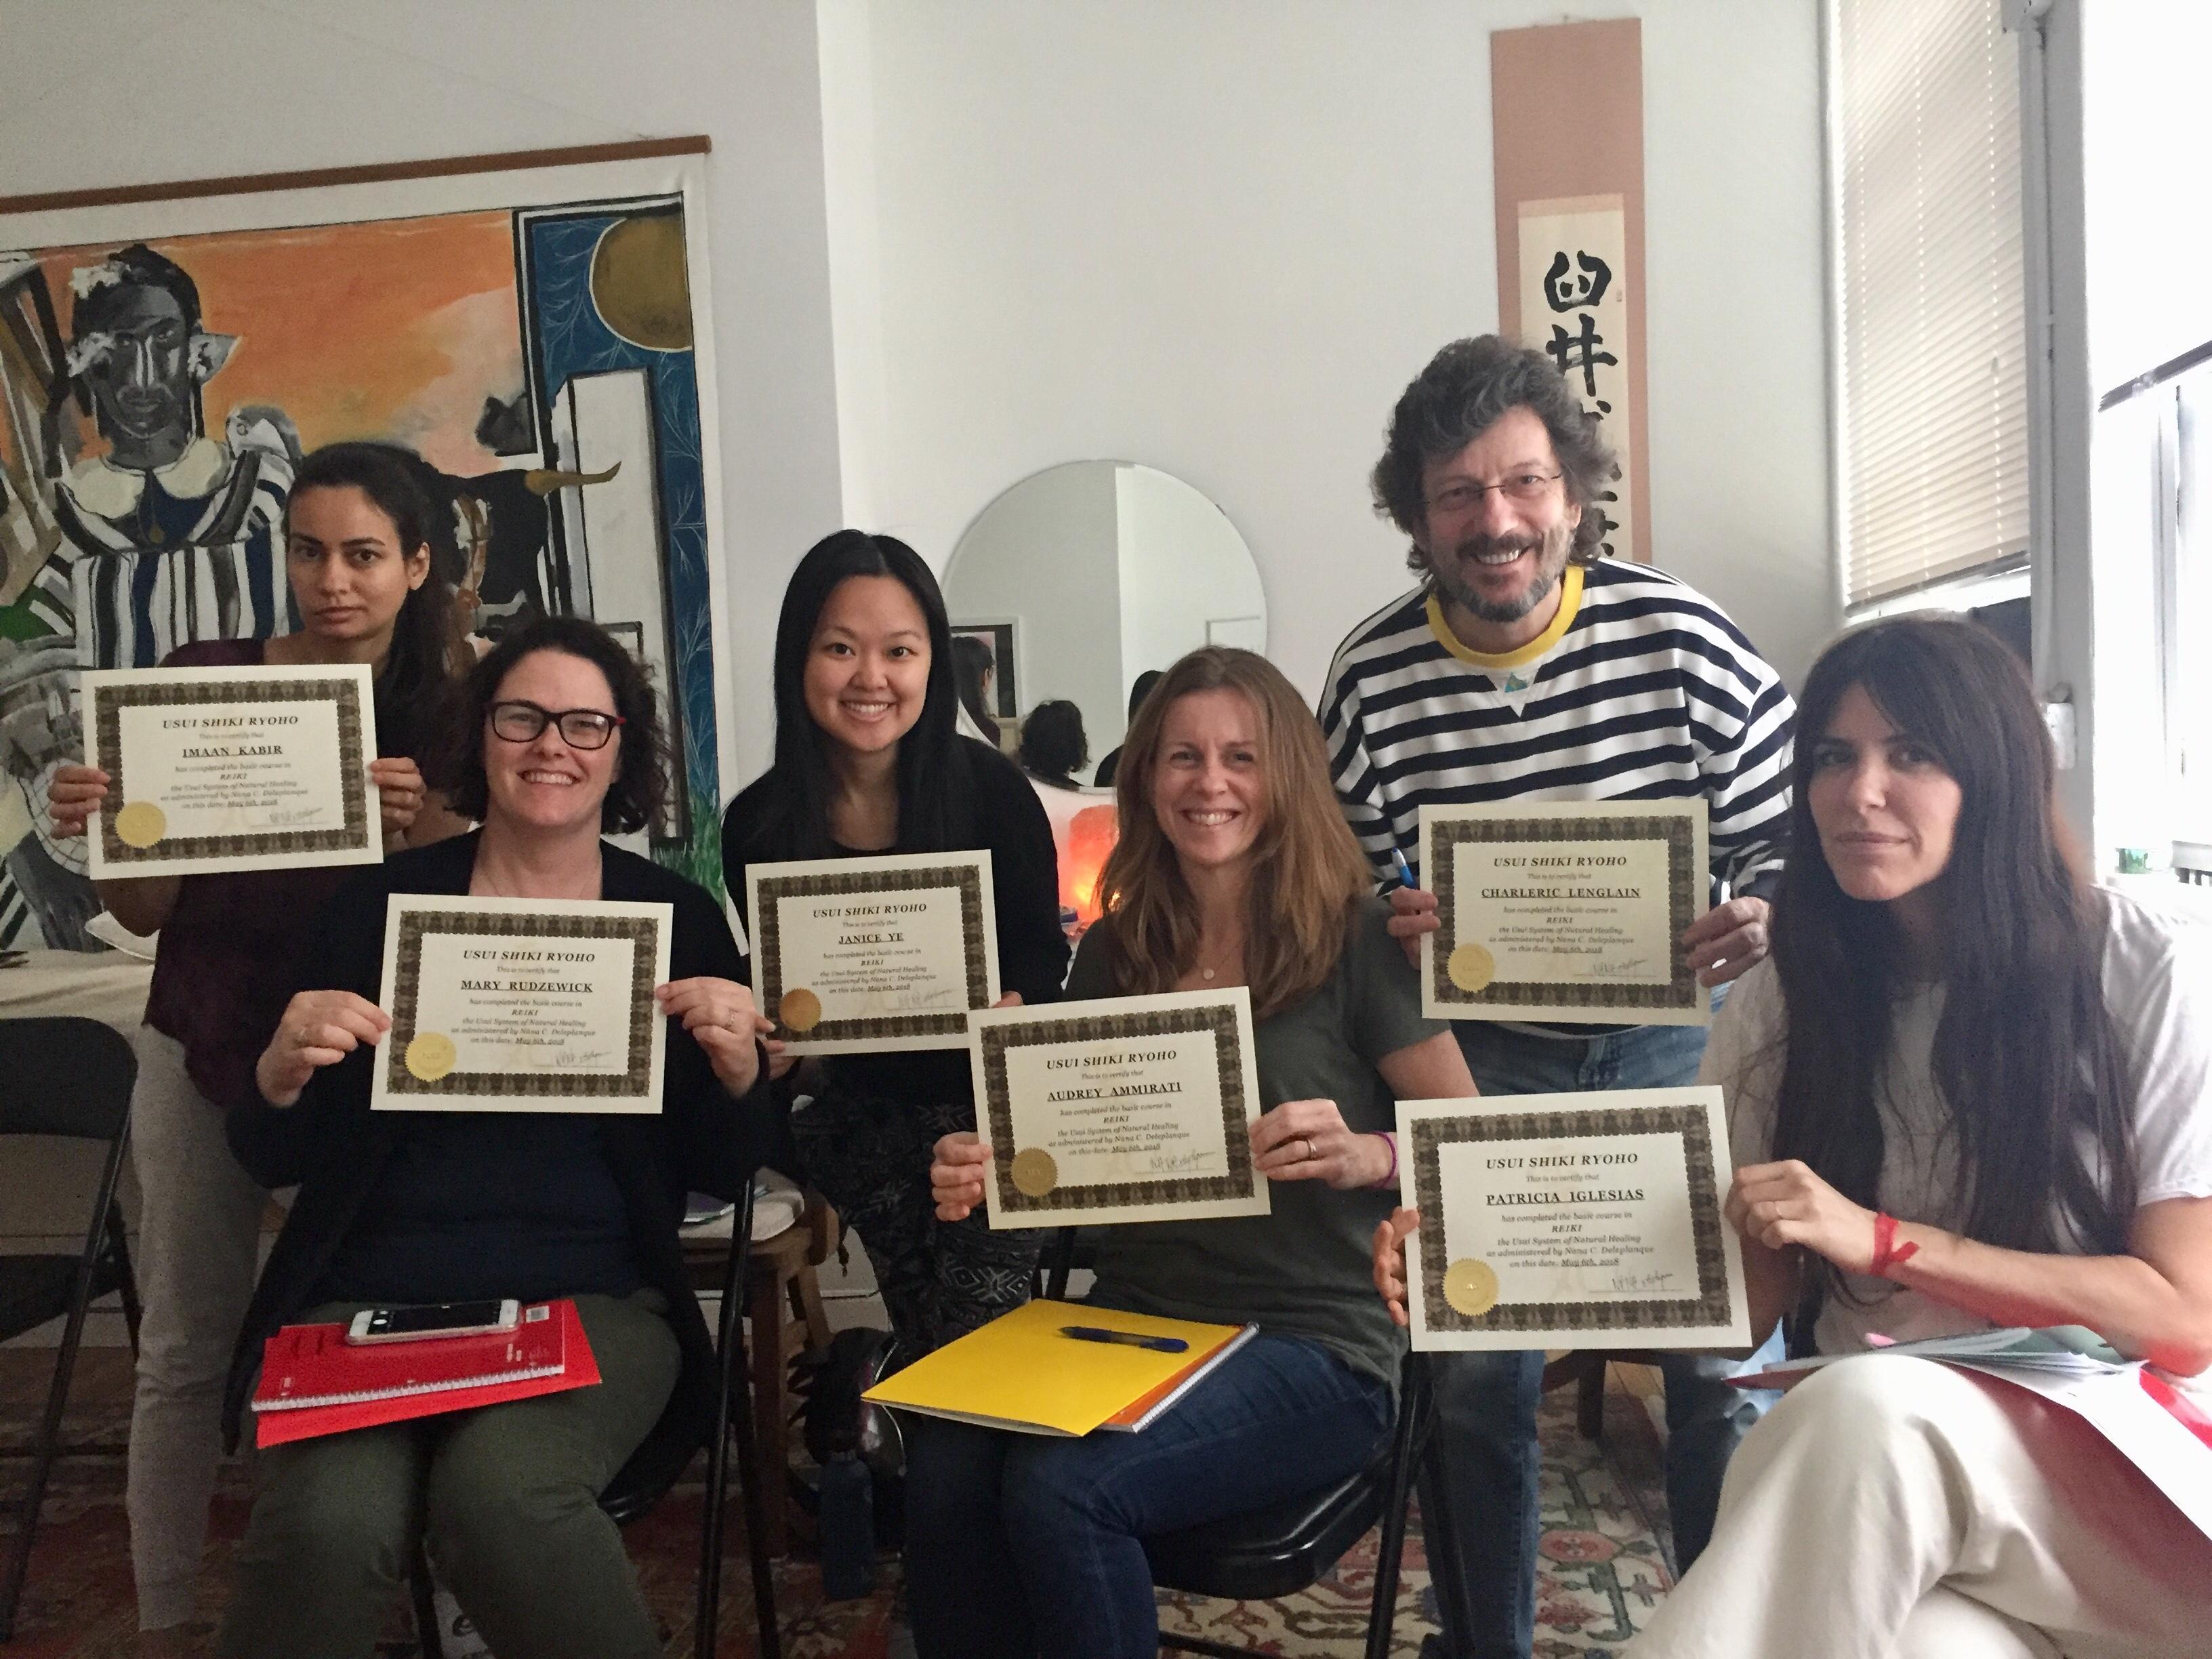 Reiki 1 certification this weekend at the new studio! A very talented group!